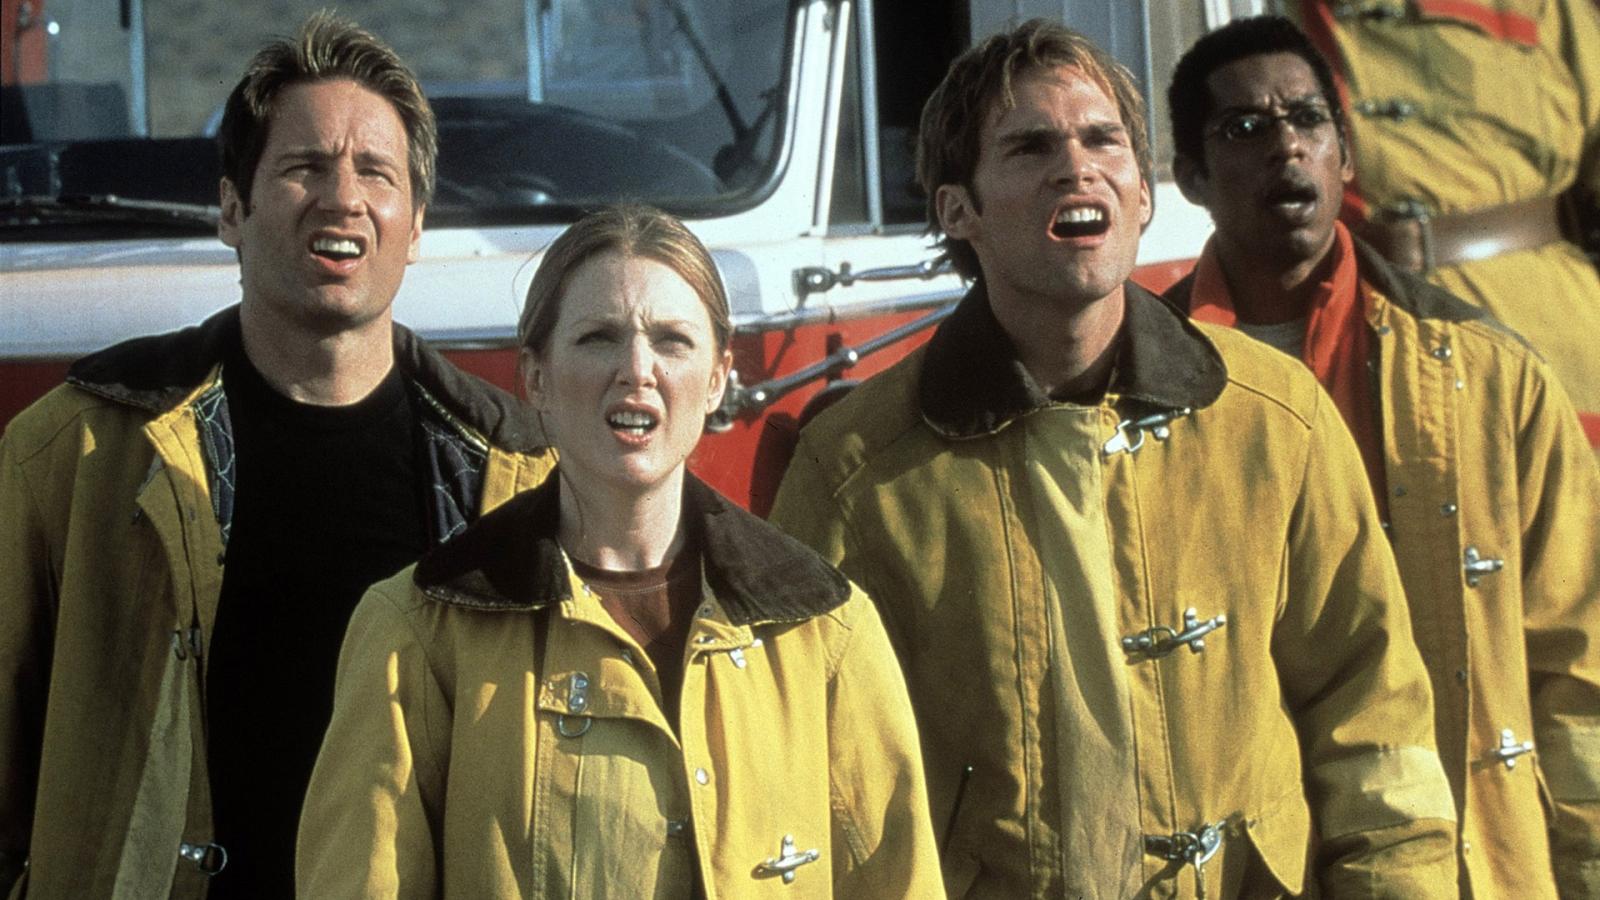 10 Action Comedies from the 2000s That Are Seriously Underrated - image 10